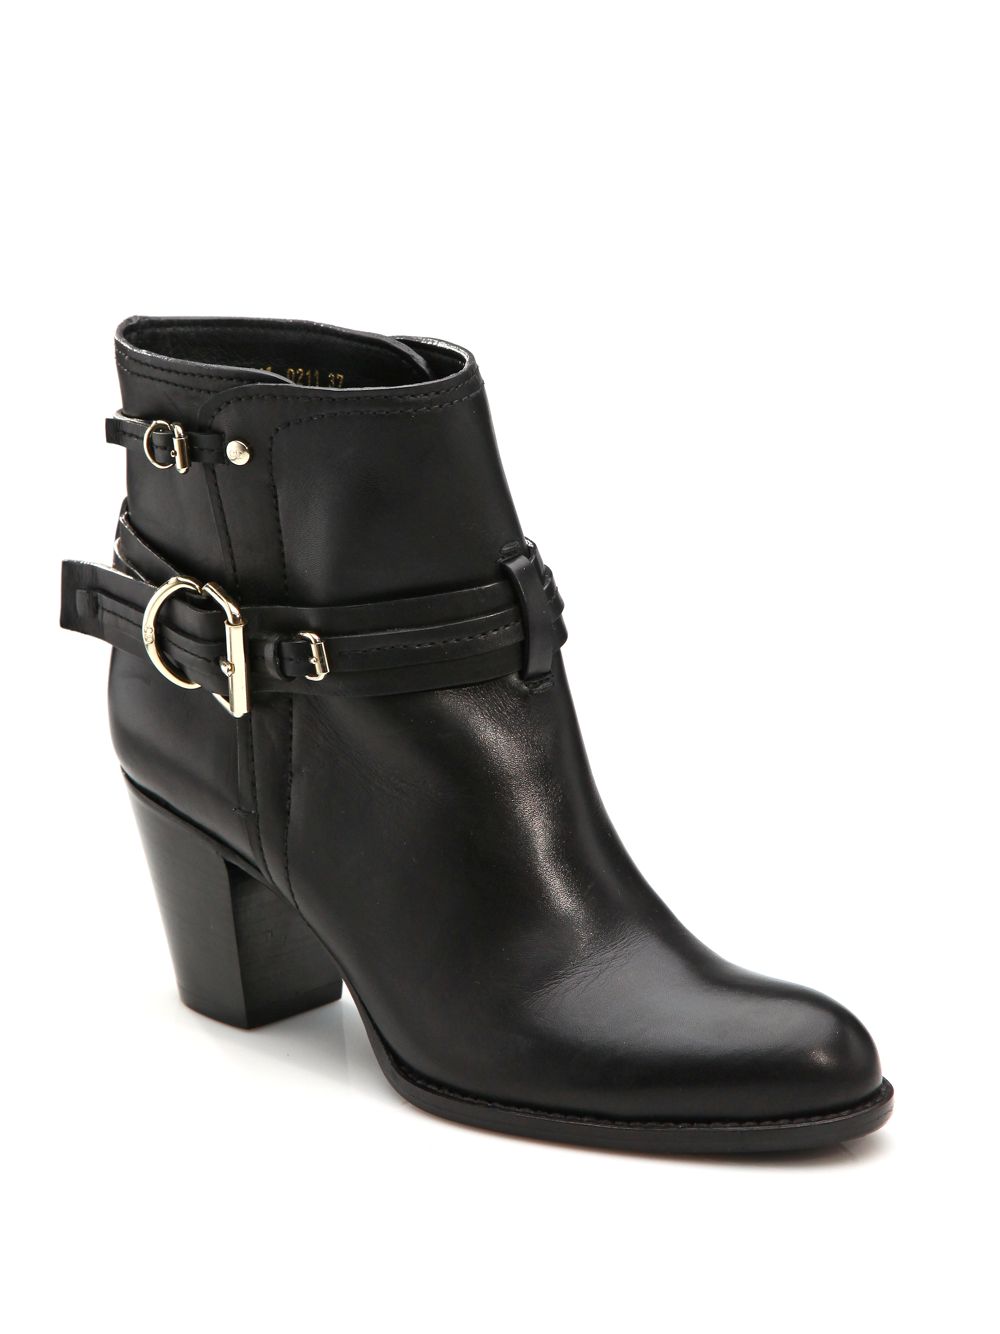 Dior Equestre Ankle Boots in Black - Lyst